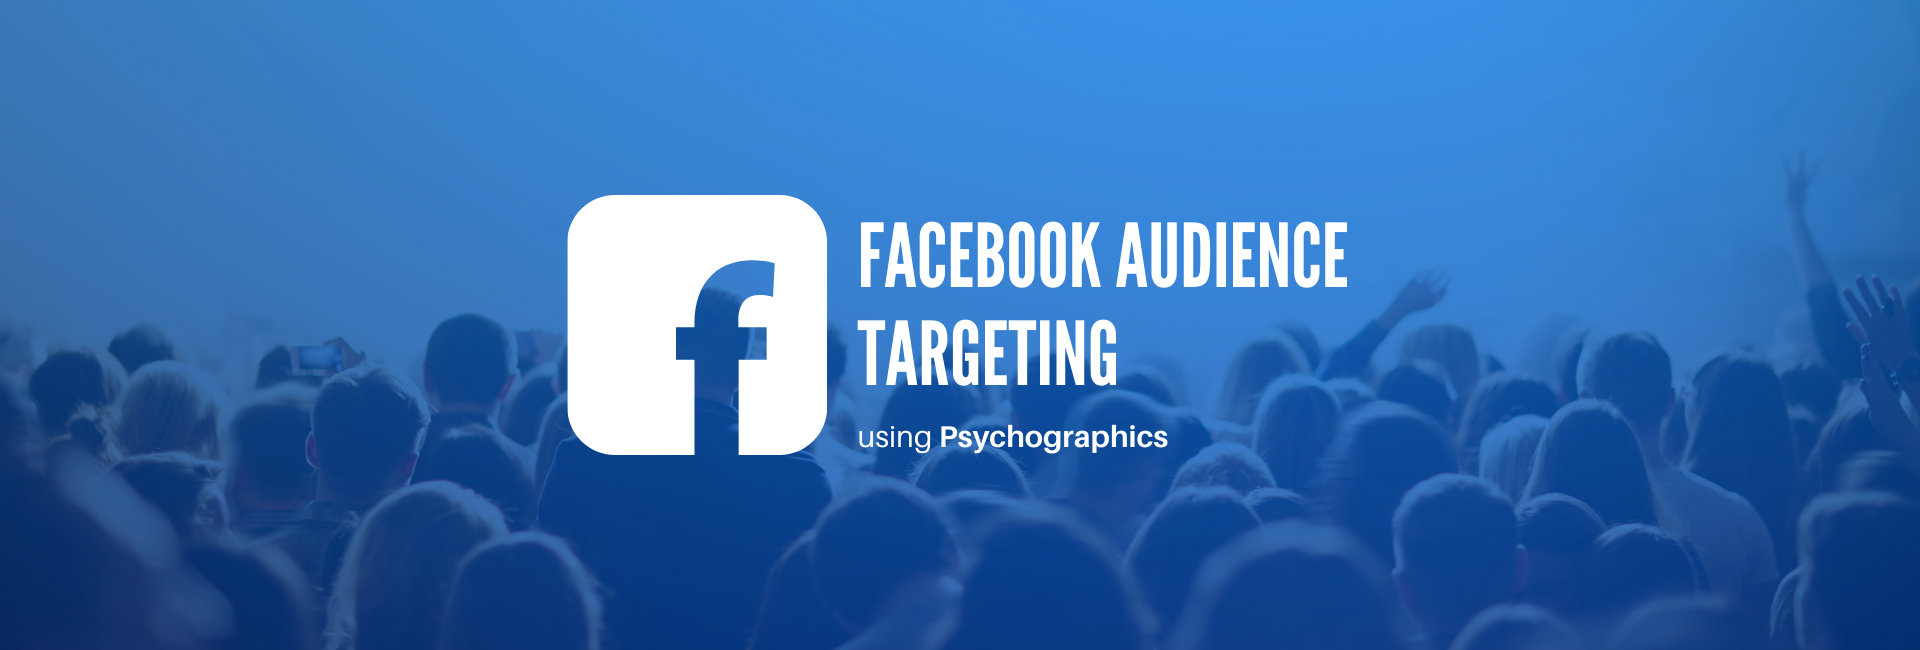 Facebook Audience Targeting using Psychographics